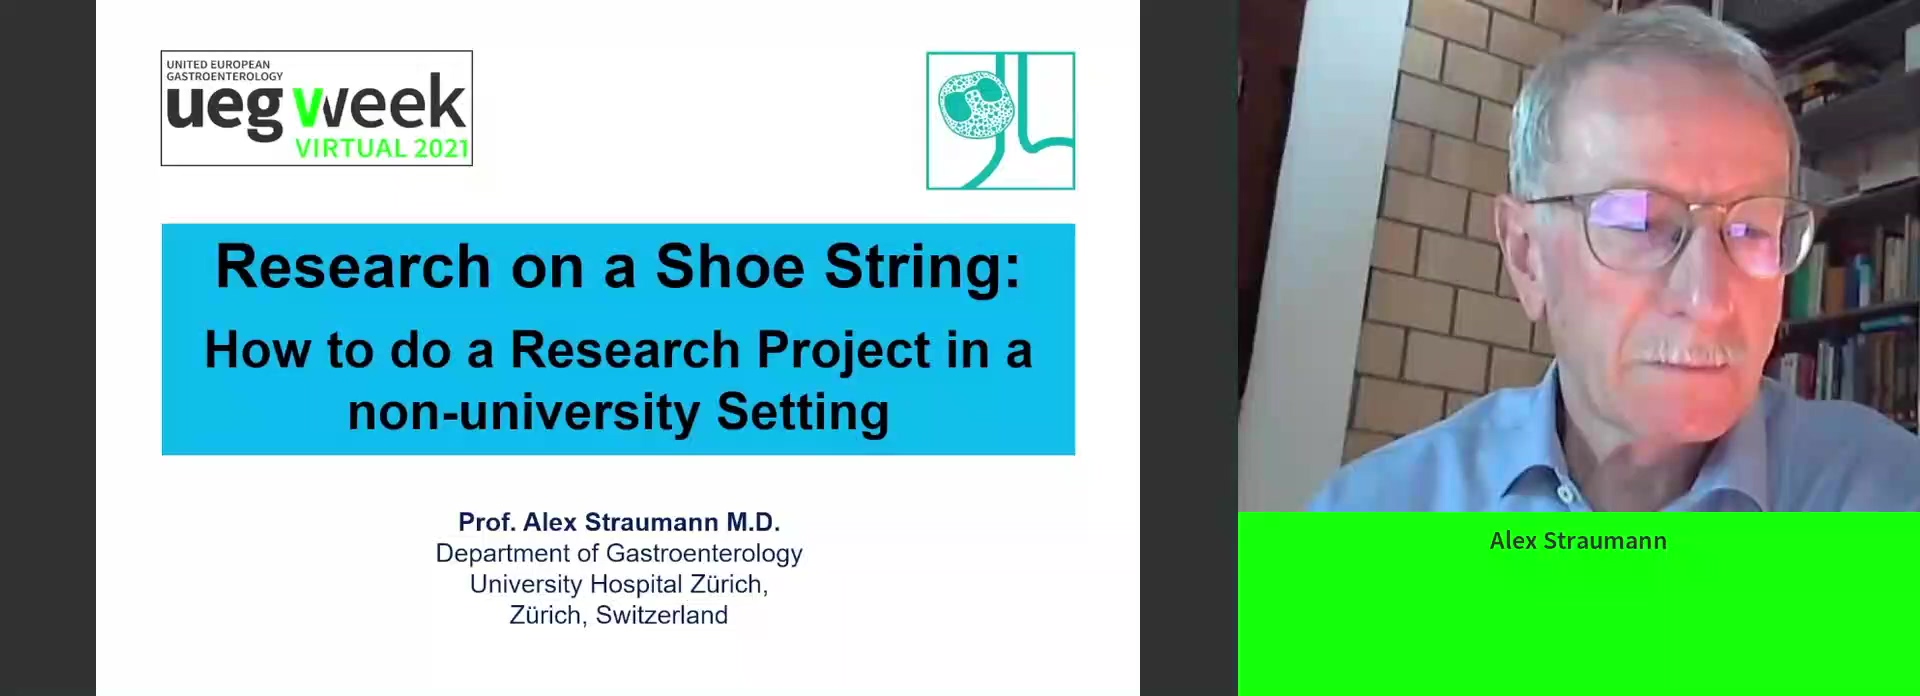 Research on a shoe string: How to do a research project in a non-university setting